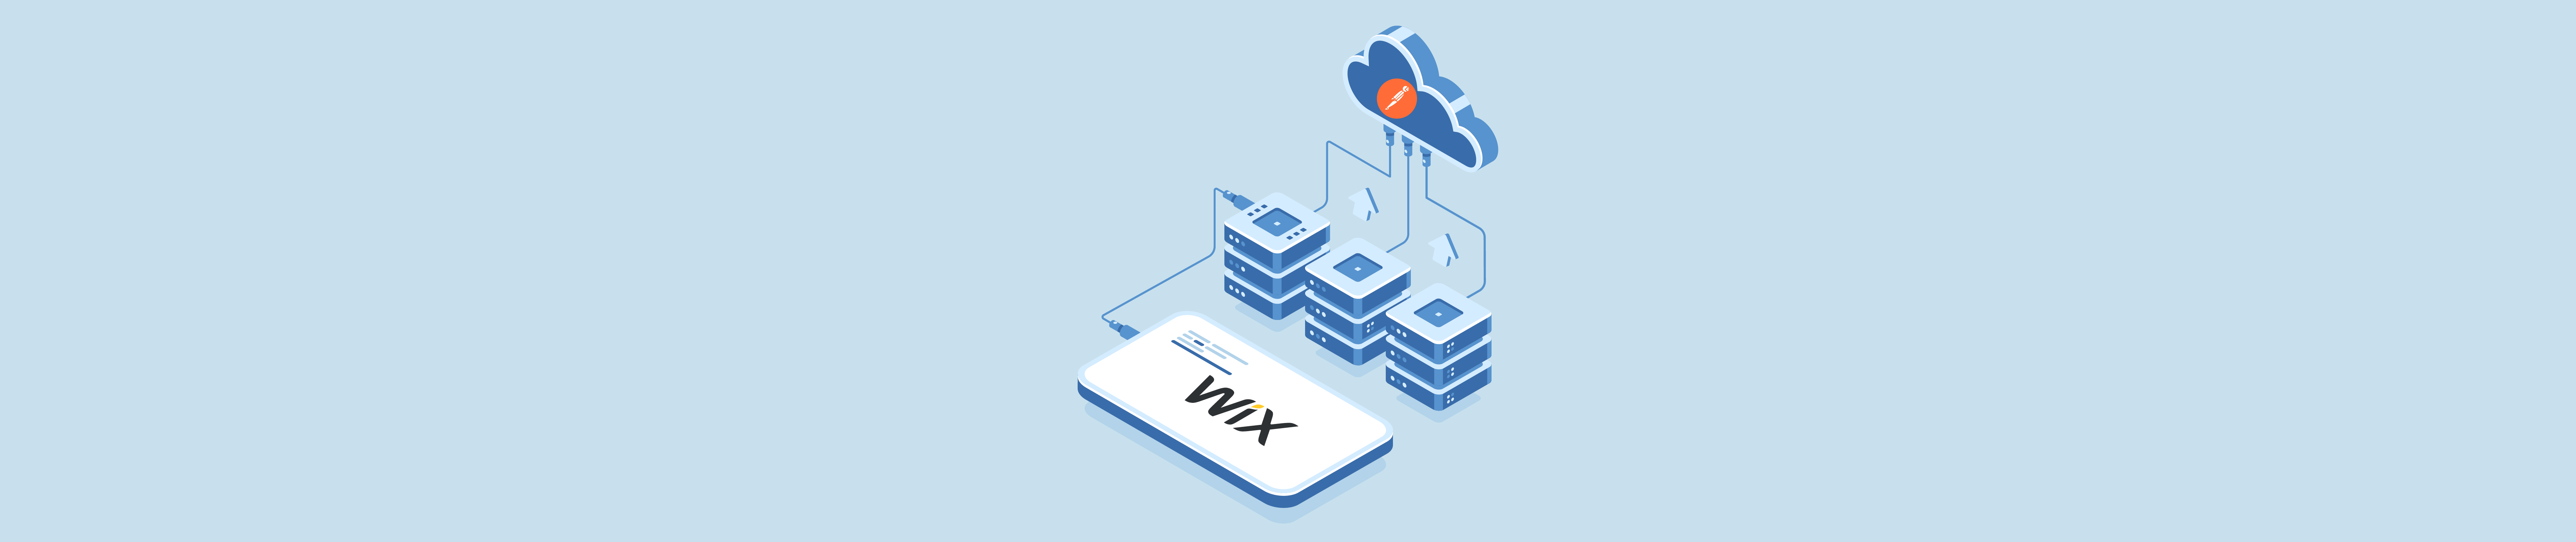 Wix API - How to get product options available using Postman